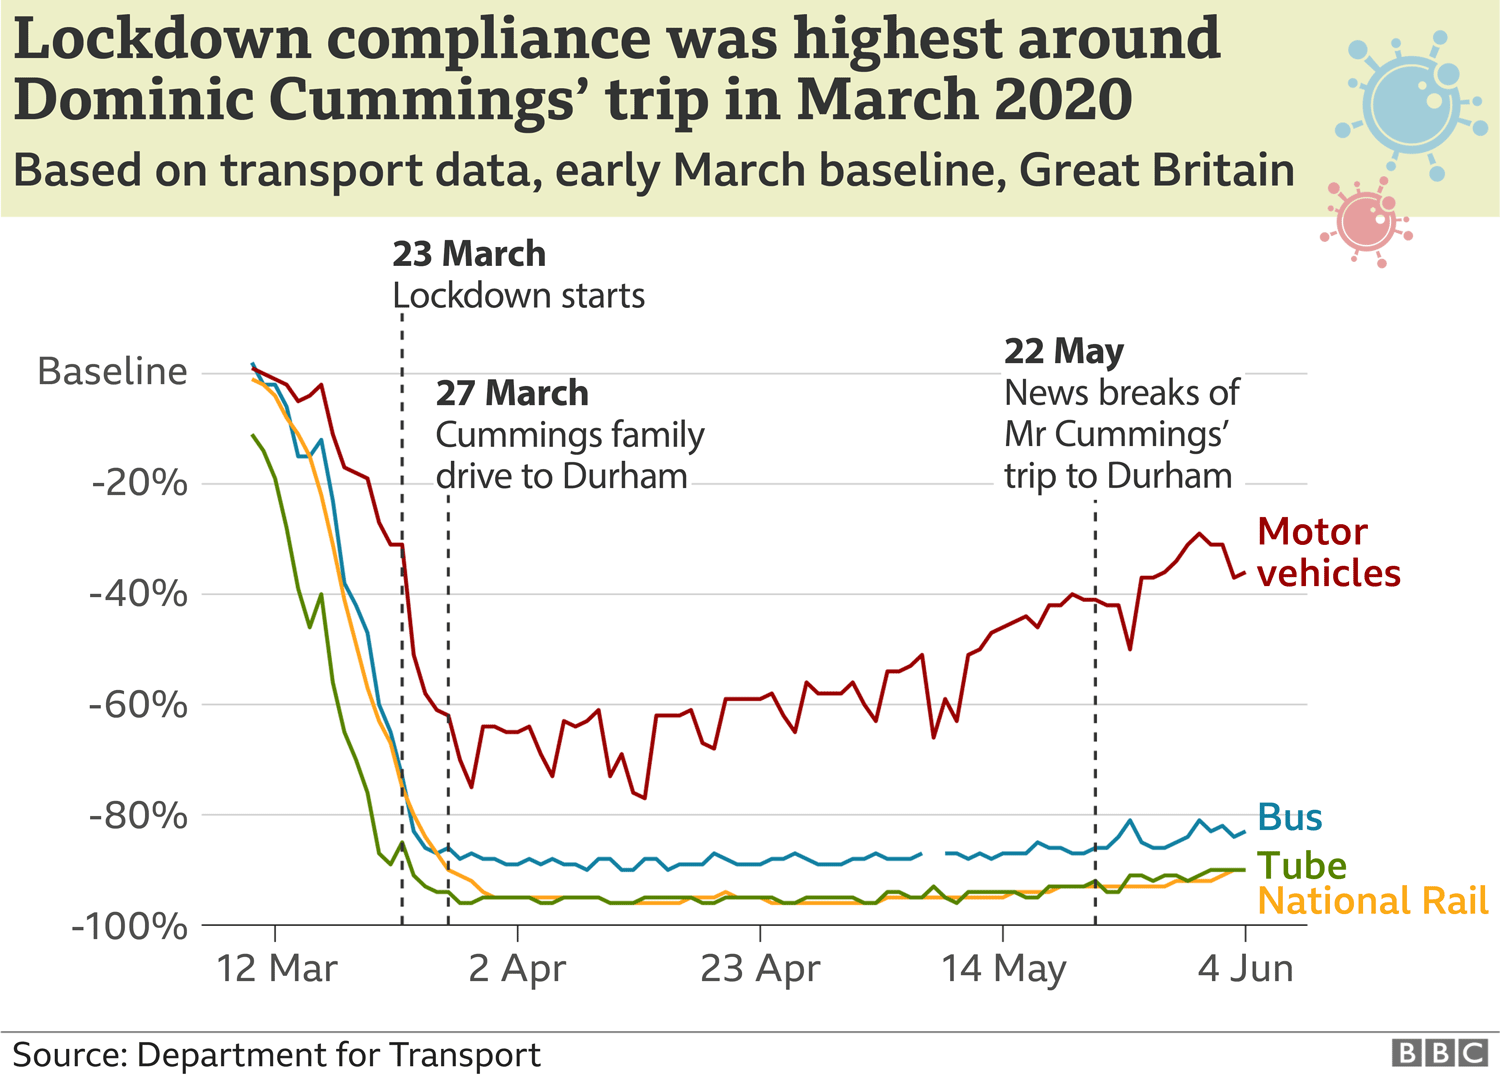 Graph using transport data to show how lockdown compliance was highest around Dominic Cummings' trip to Durham in March 2020